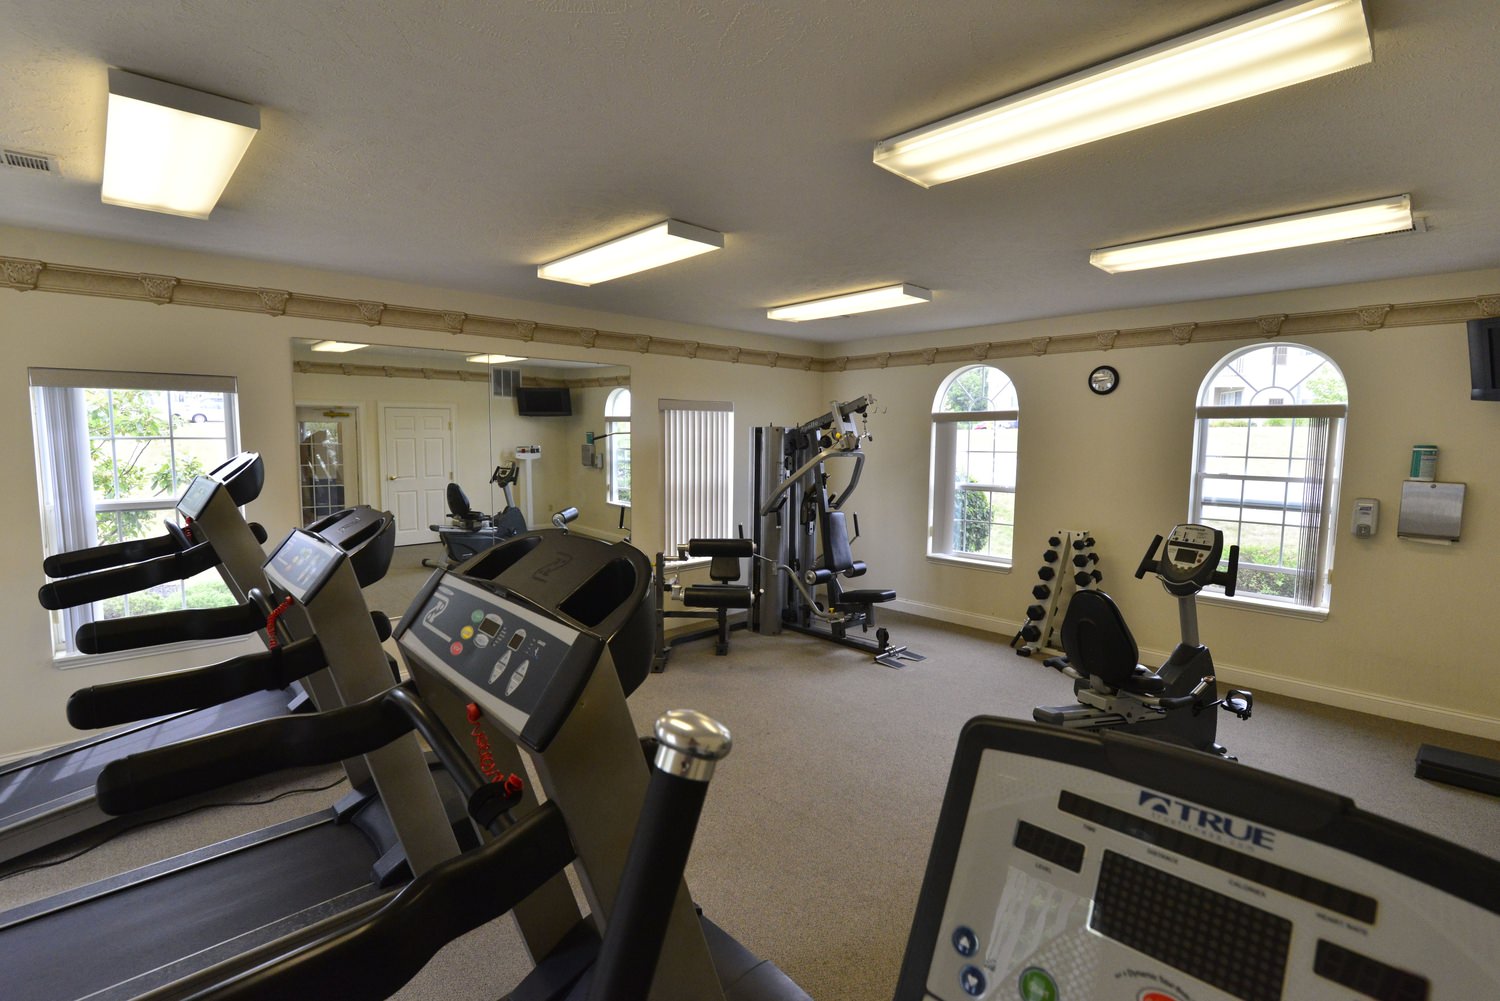 A gym that has treadmills as well as exercise machines in it and some weights in the distance.